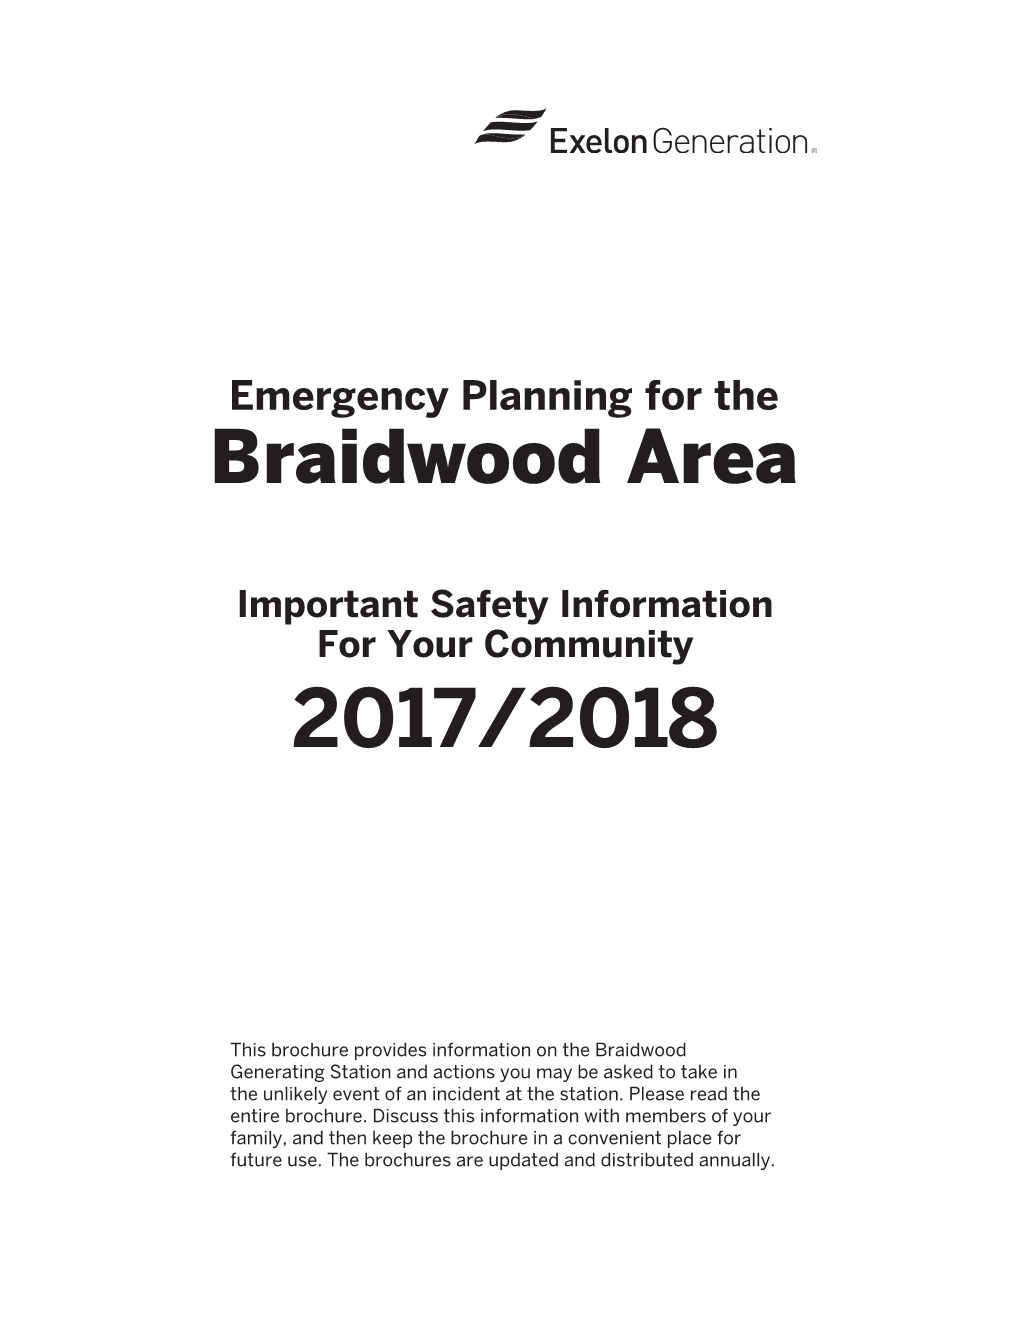 Emergency Planning for the Braidwood Area